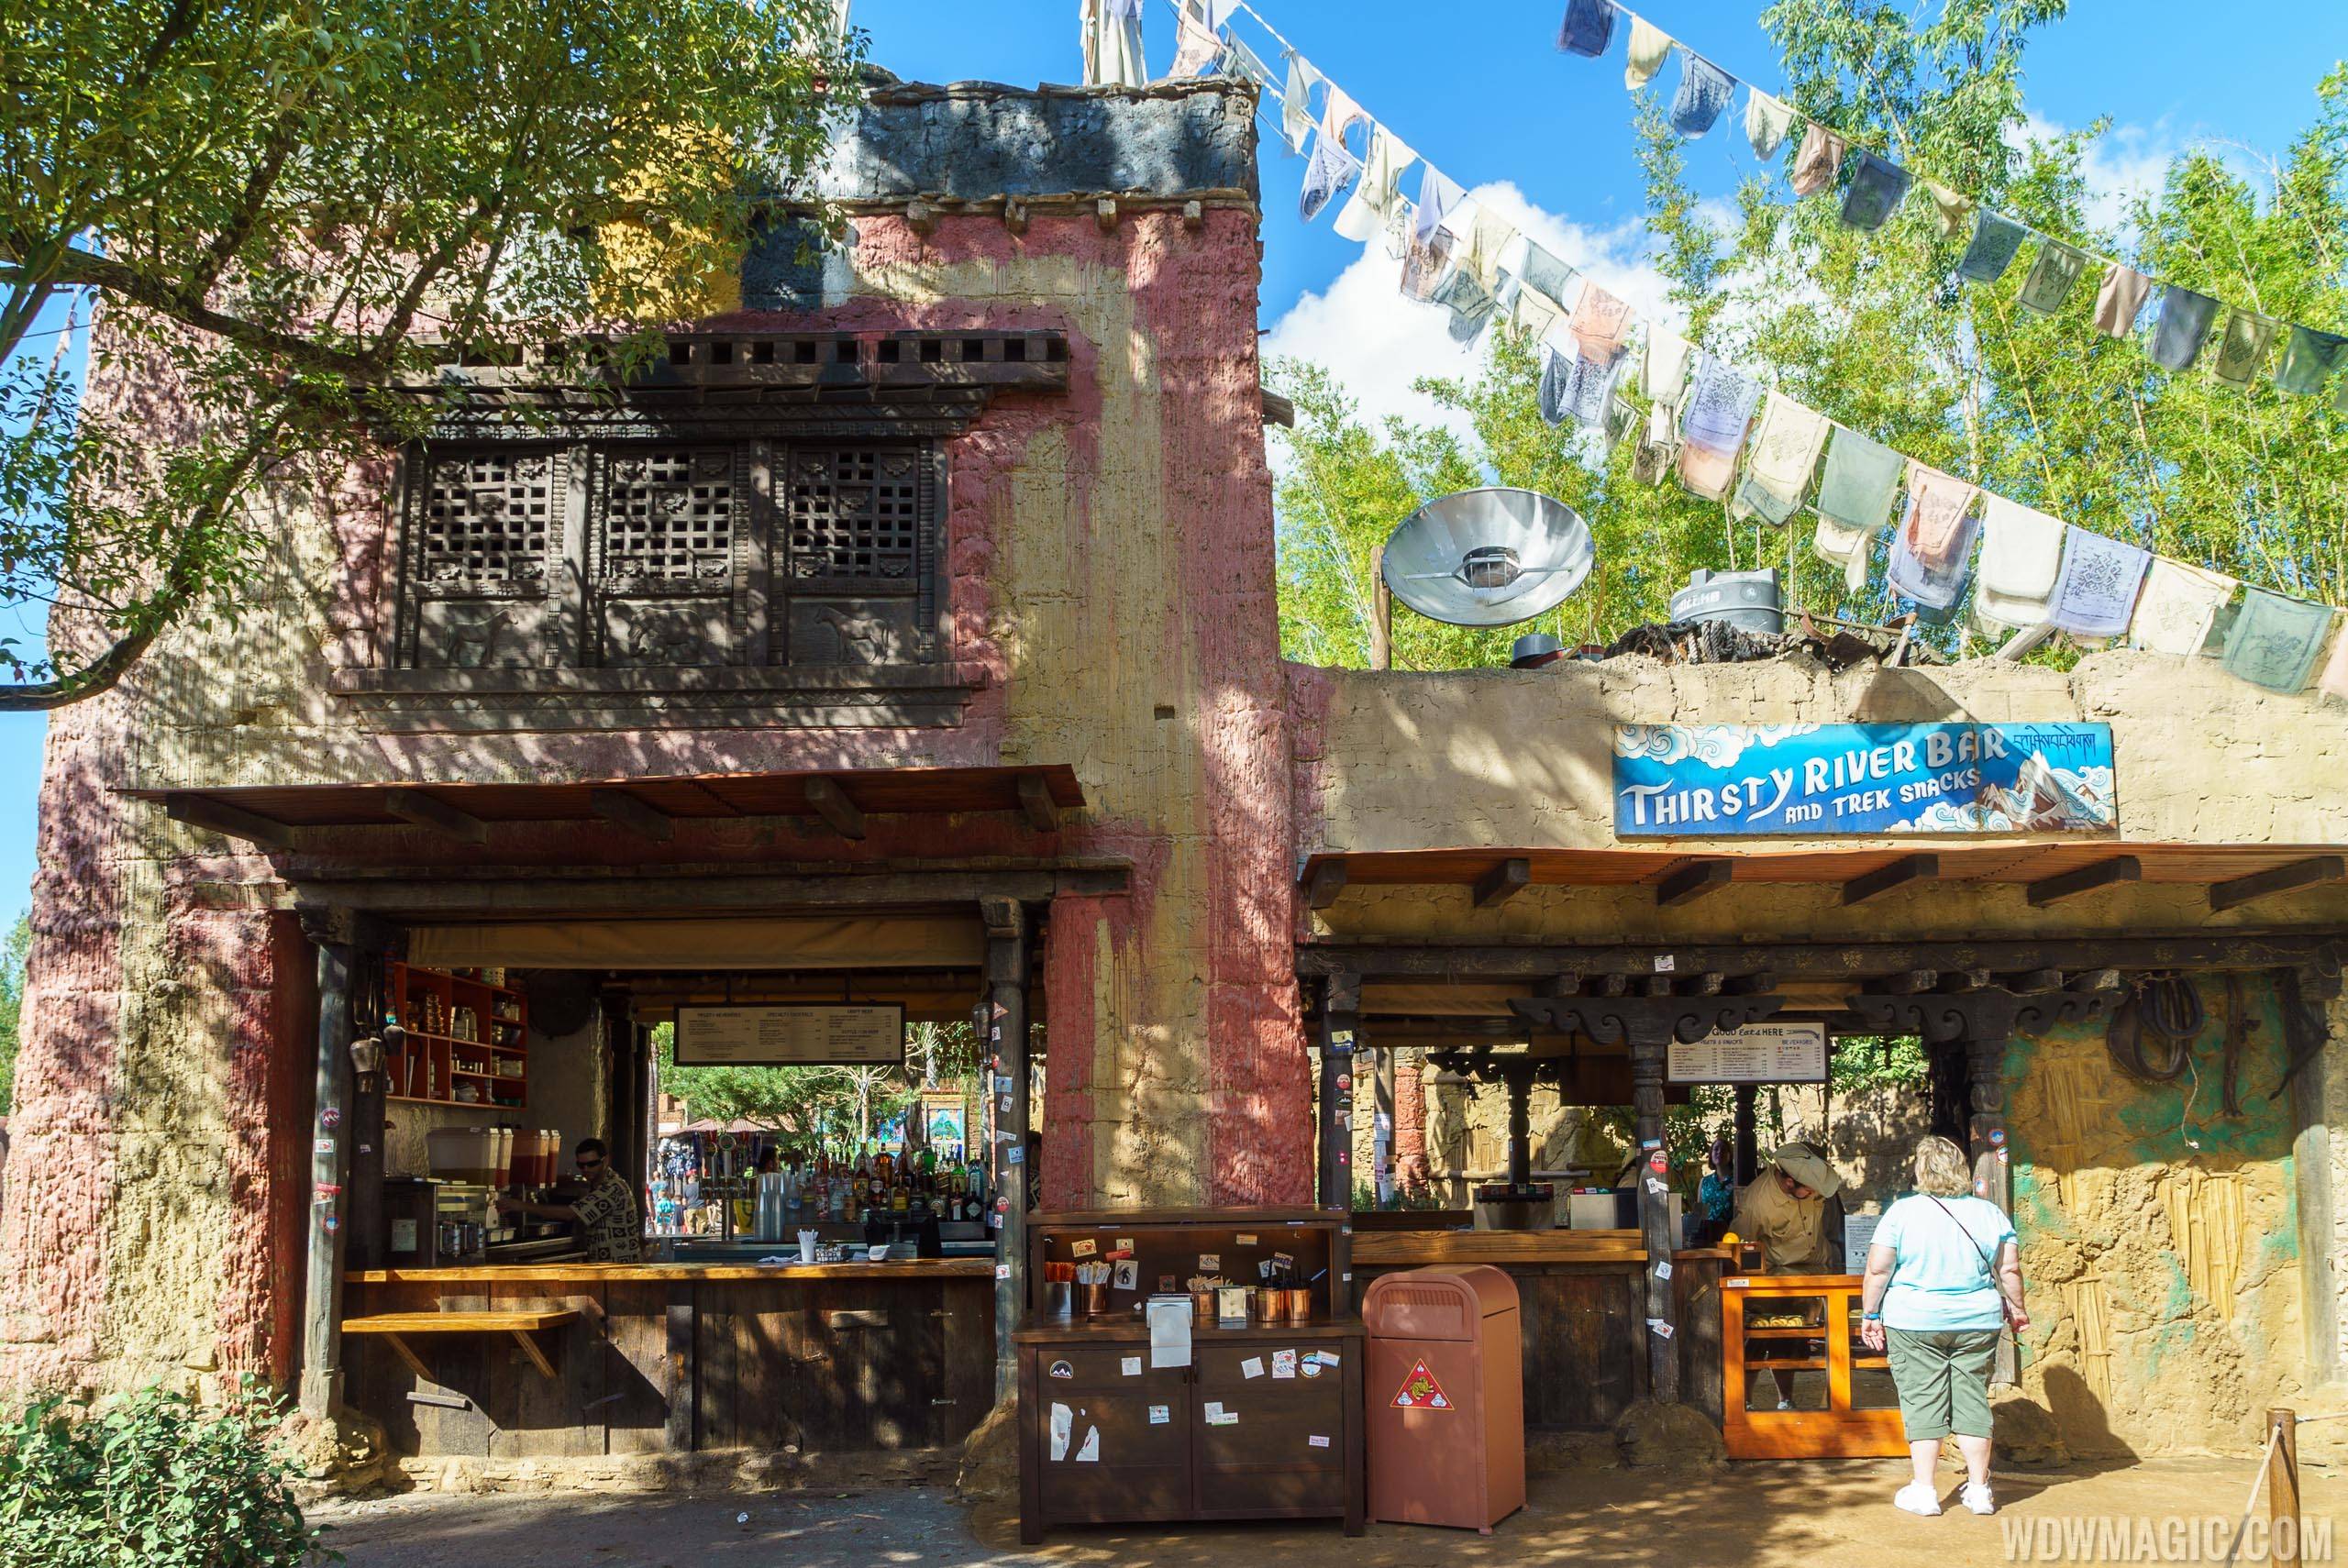 Thirsty River Bar and Trek Snacks overview